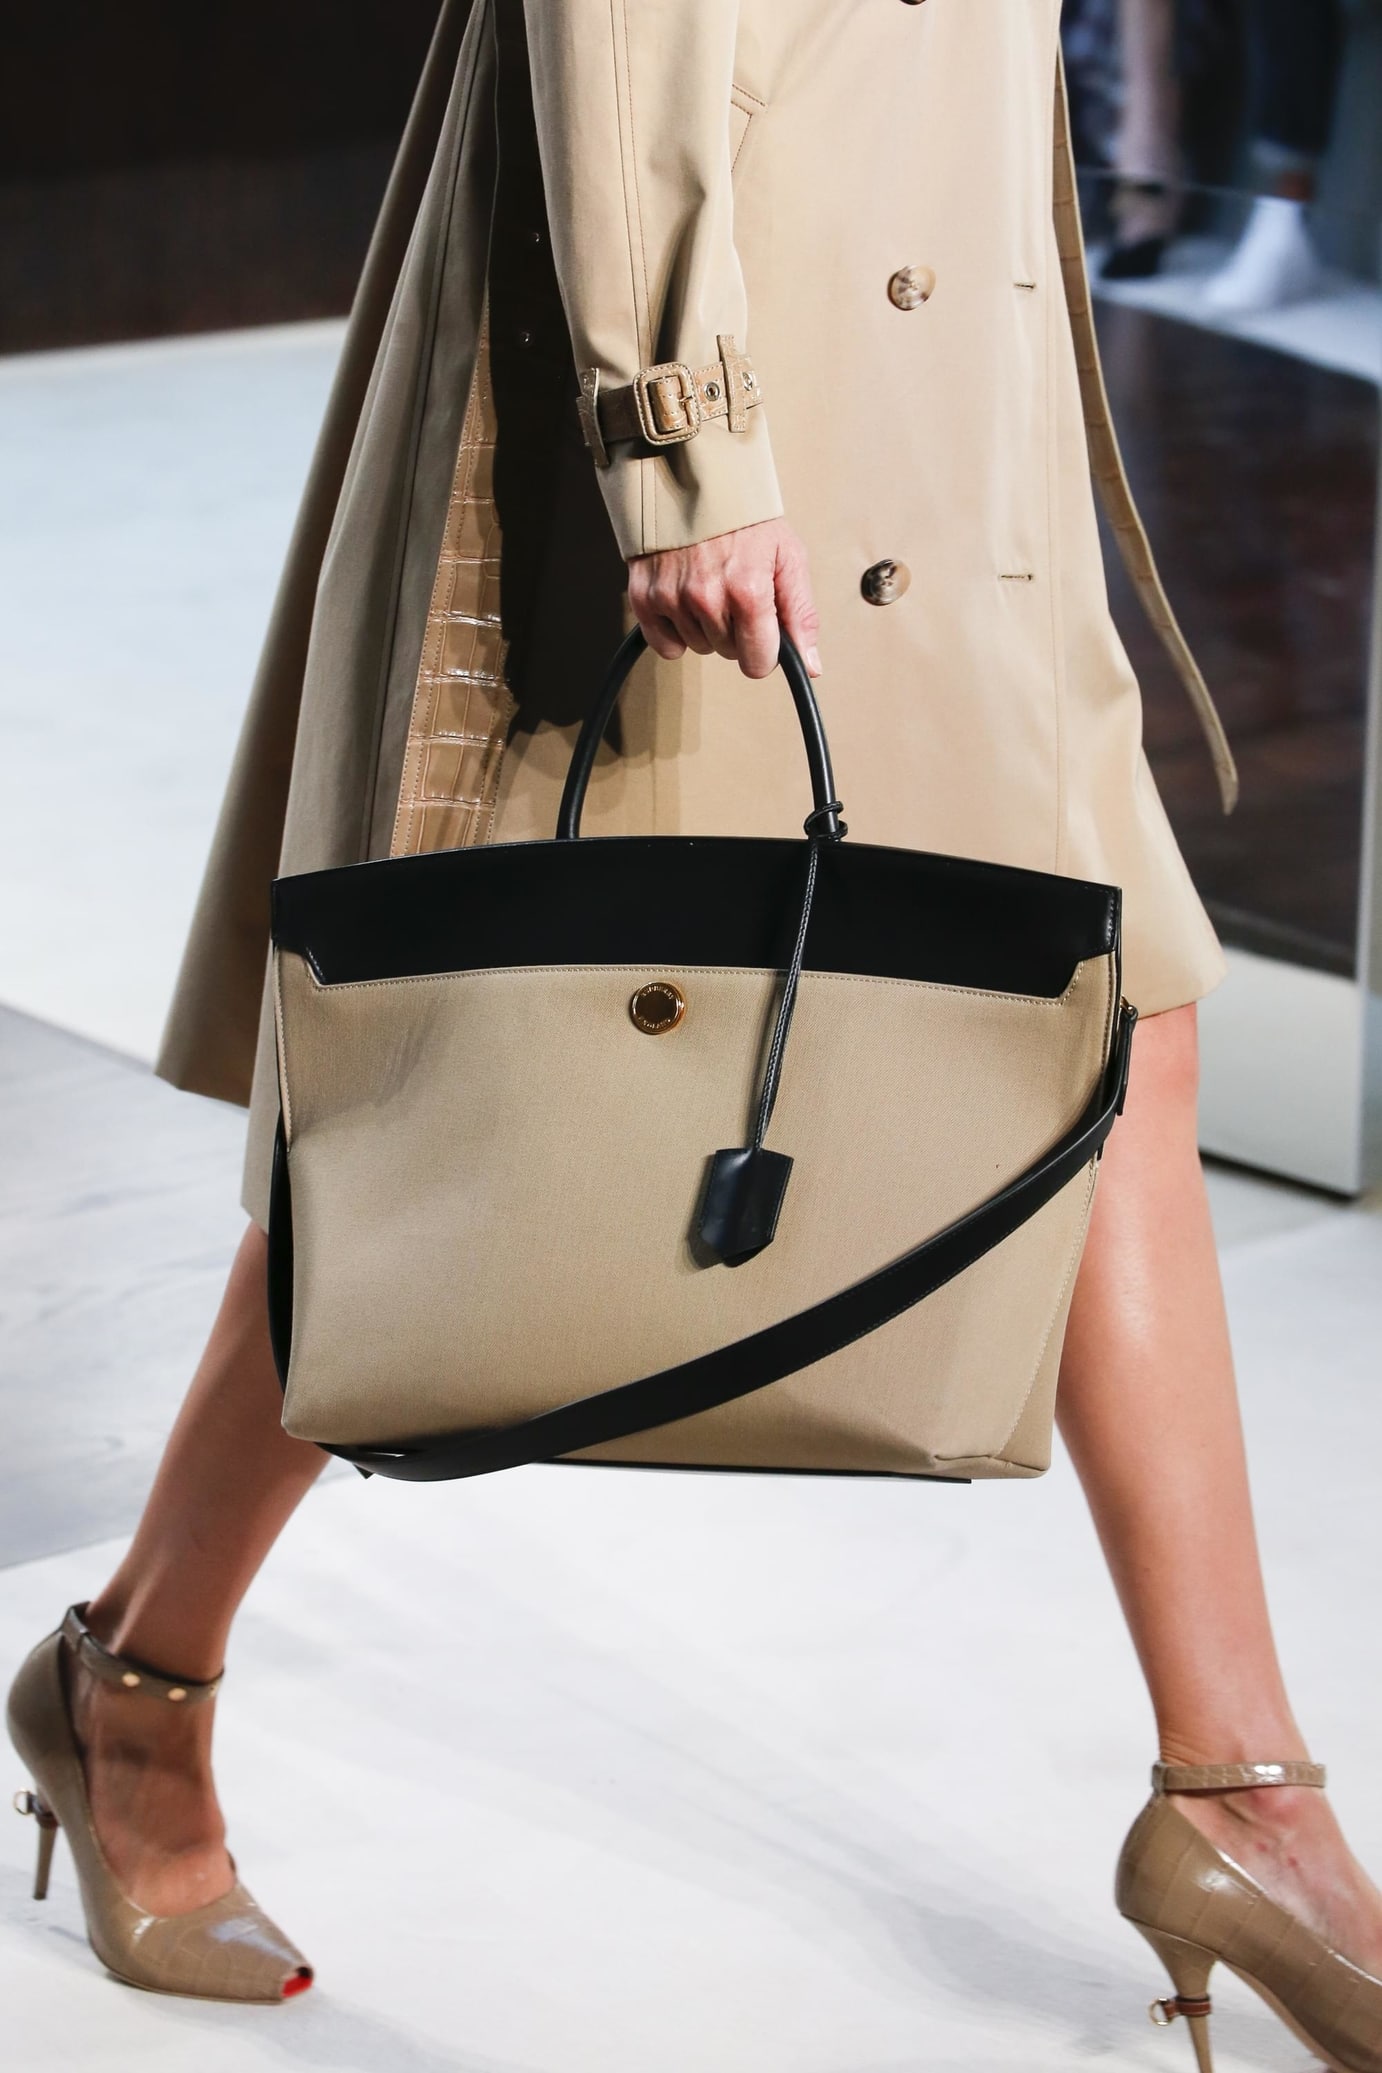 Burberry Spring/Summer 2019 Runway Bag Collection | Spotted Fashion